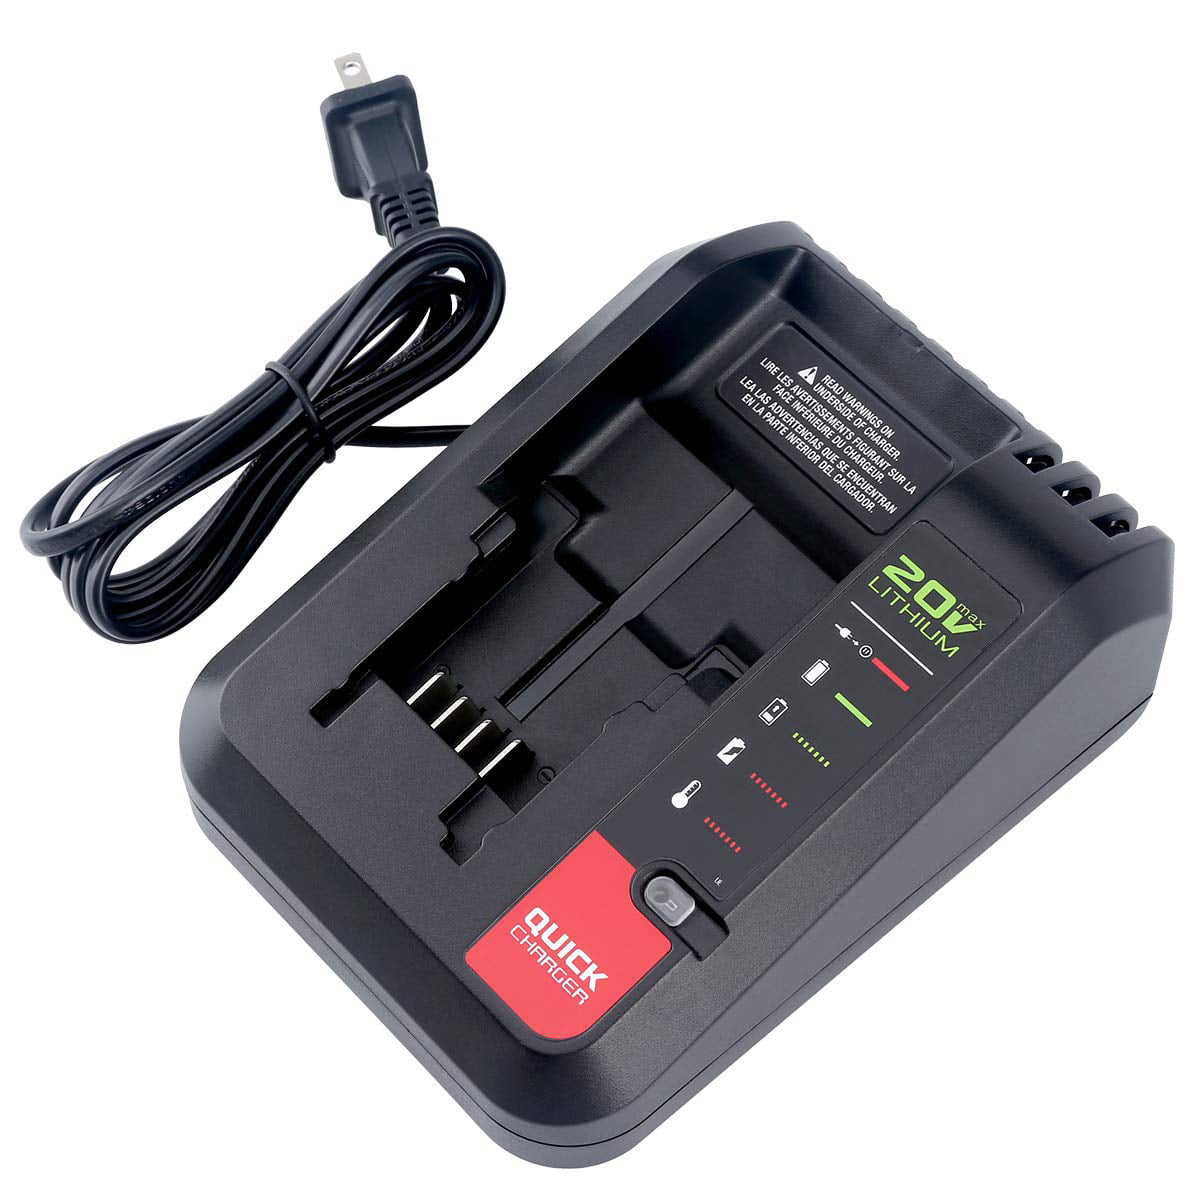 Tueddur 20V Upgraded Battery Charger PCC692L Replacement for Porter Cable and Black&Decker 20V Max Lithium-ion charger PCC691 BDCAC202B LCS1620B,Compatible with Battery PCC680L PCC681L PCC682L PCC685L